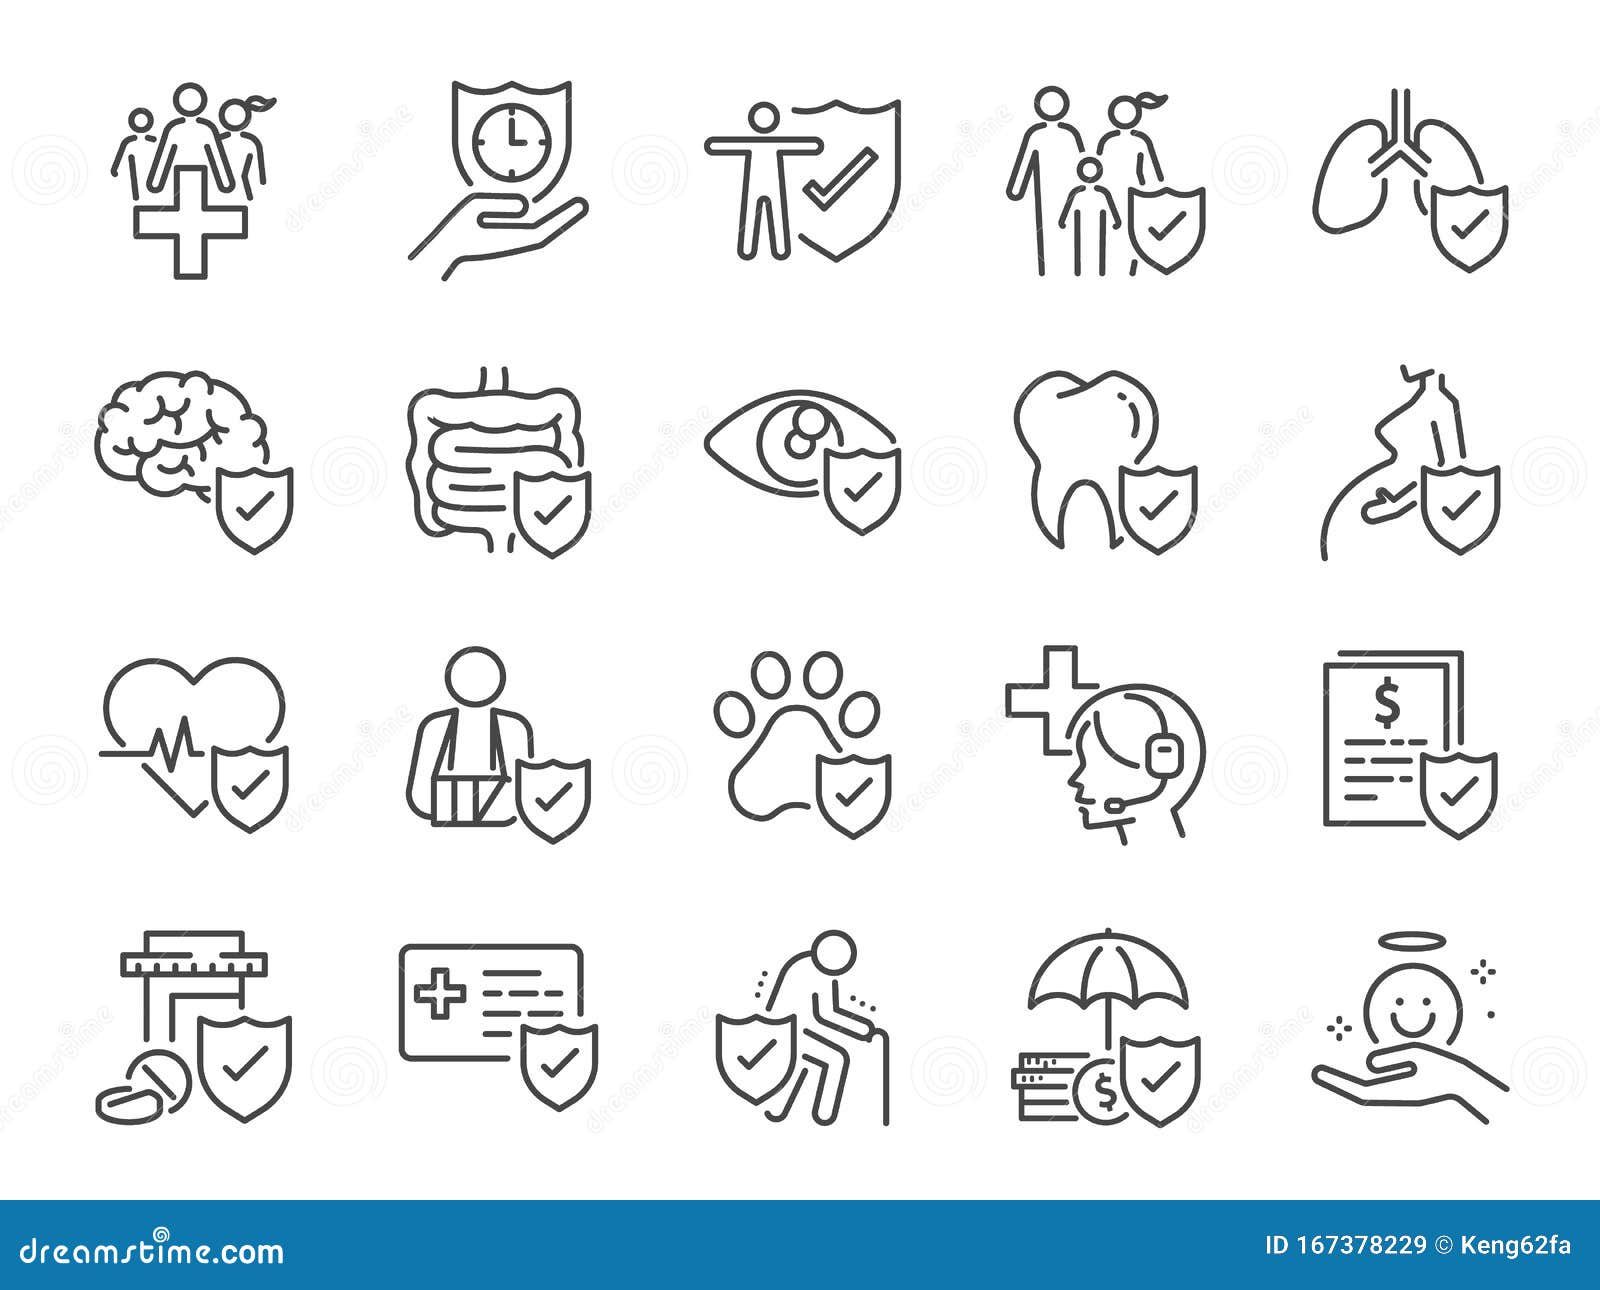 health insurance icon set. included icons as emergency, secure, risk management, protection, healthcare and more.